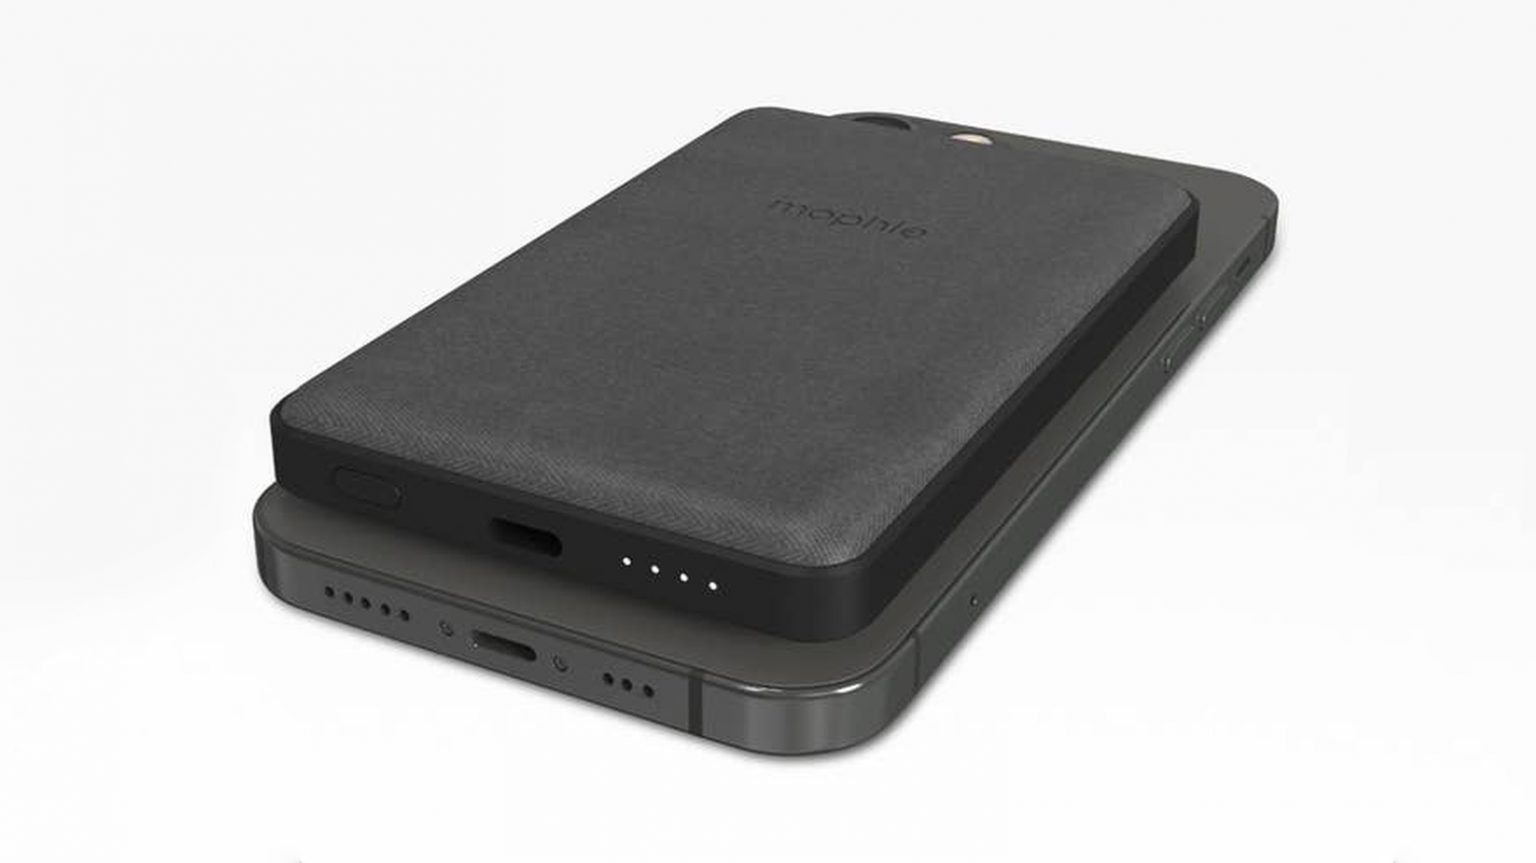 Mophie goes into iPhone MagSafe accessories in a big way